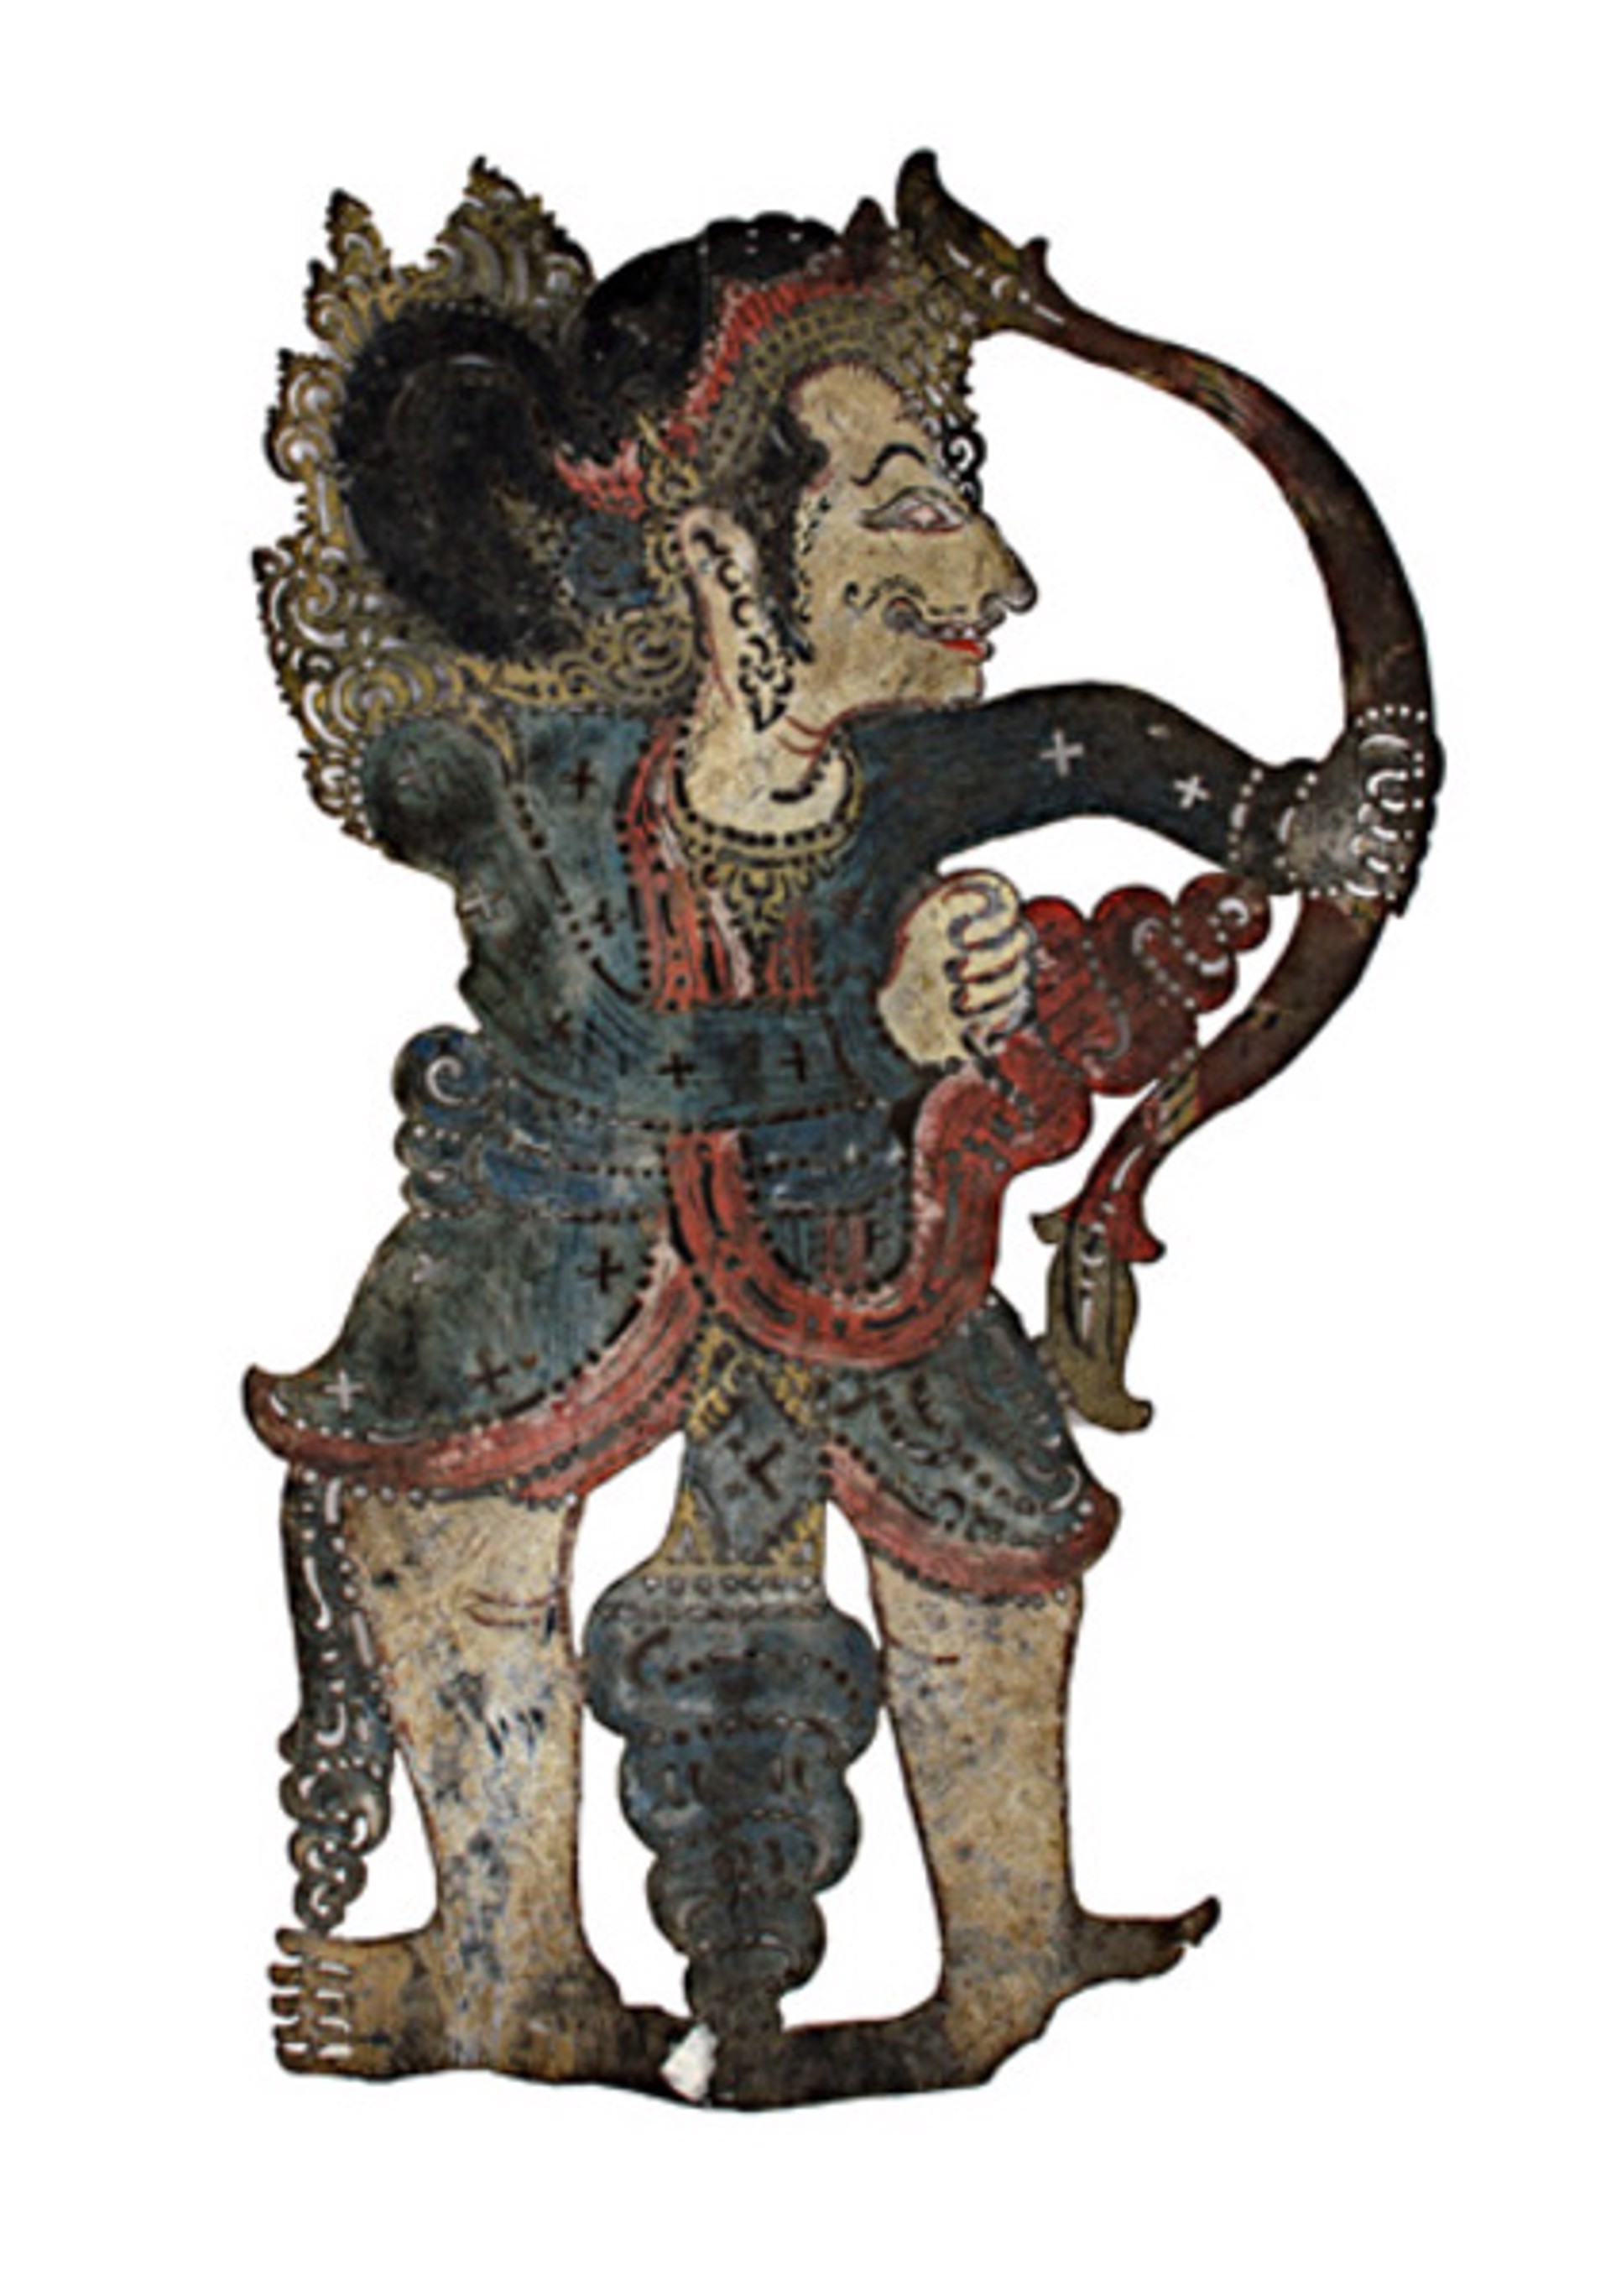 ShadowPuppet Wayang Purwa by Indonesian